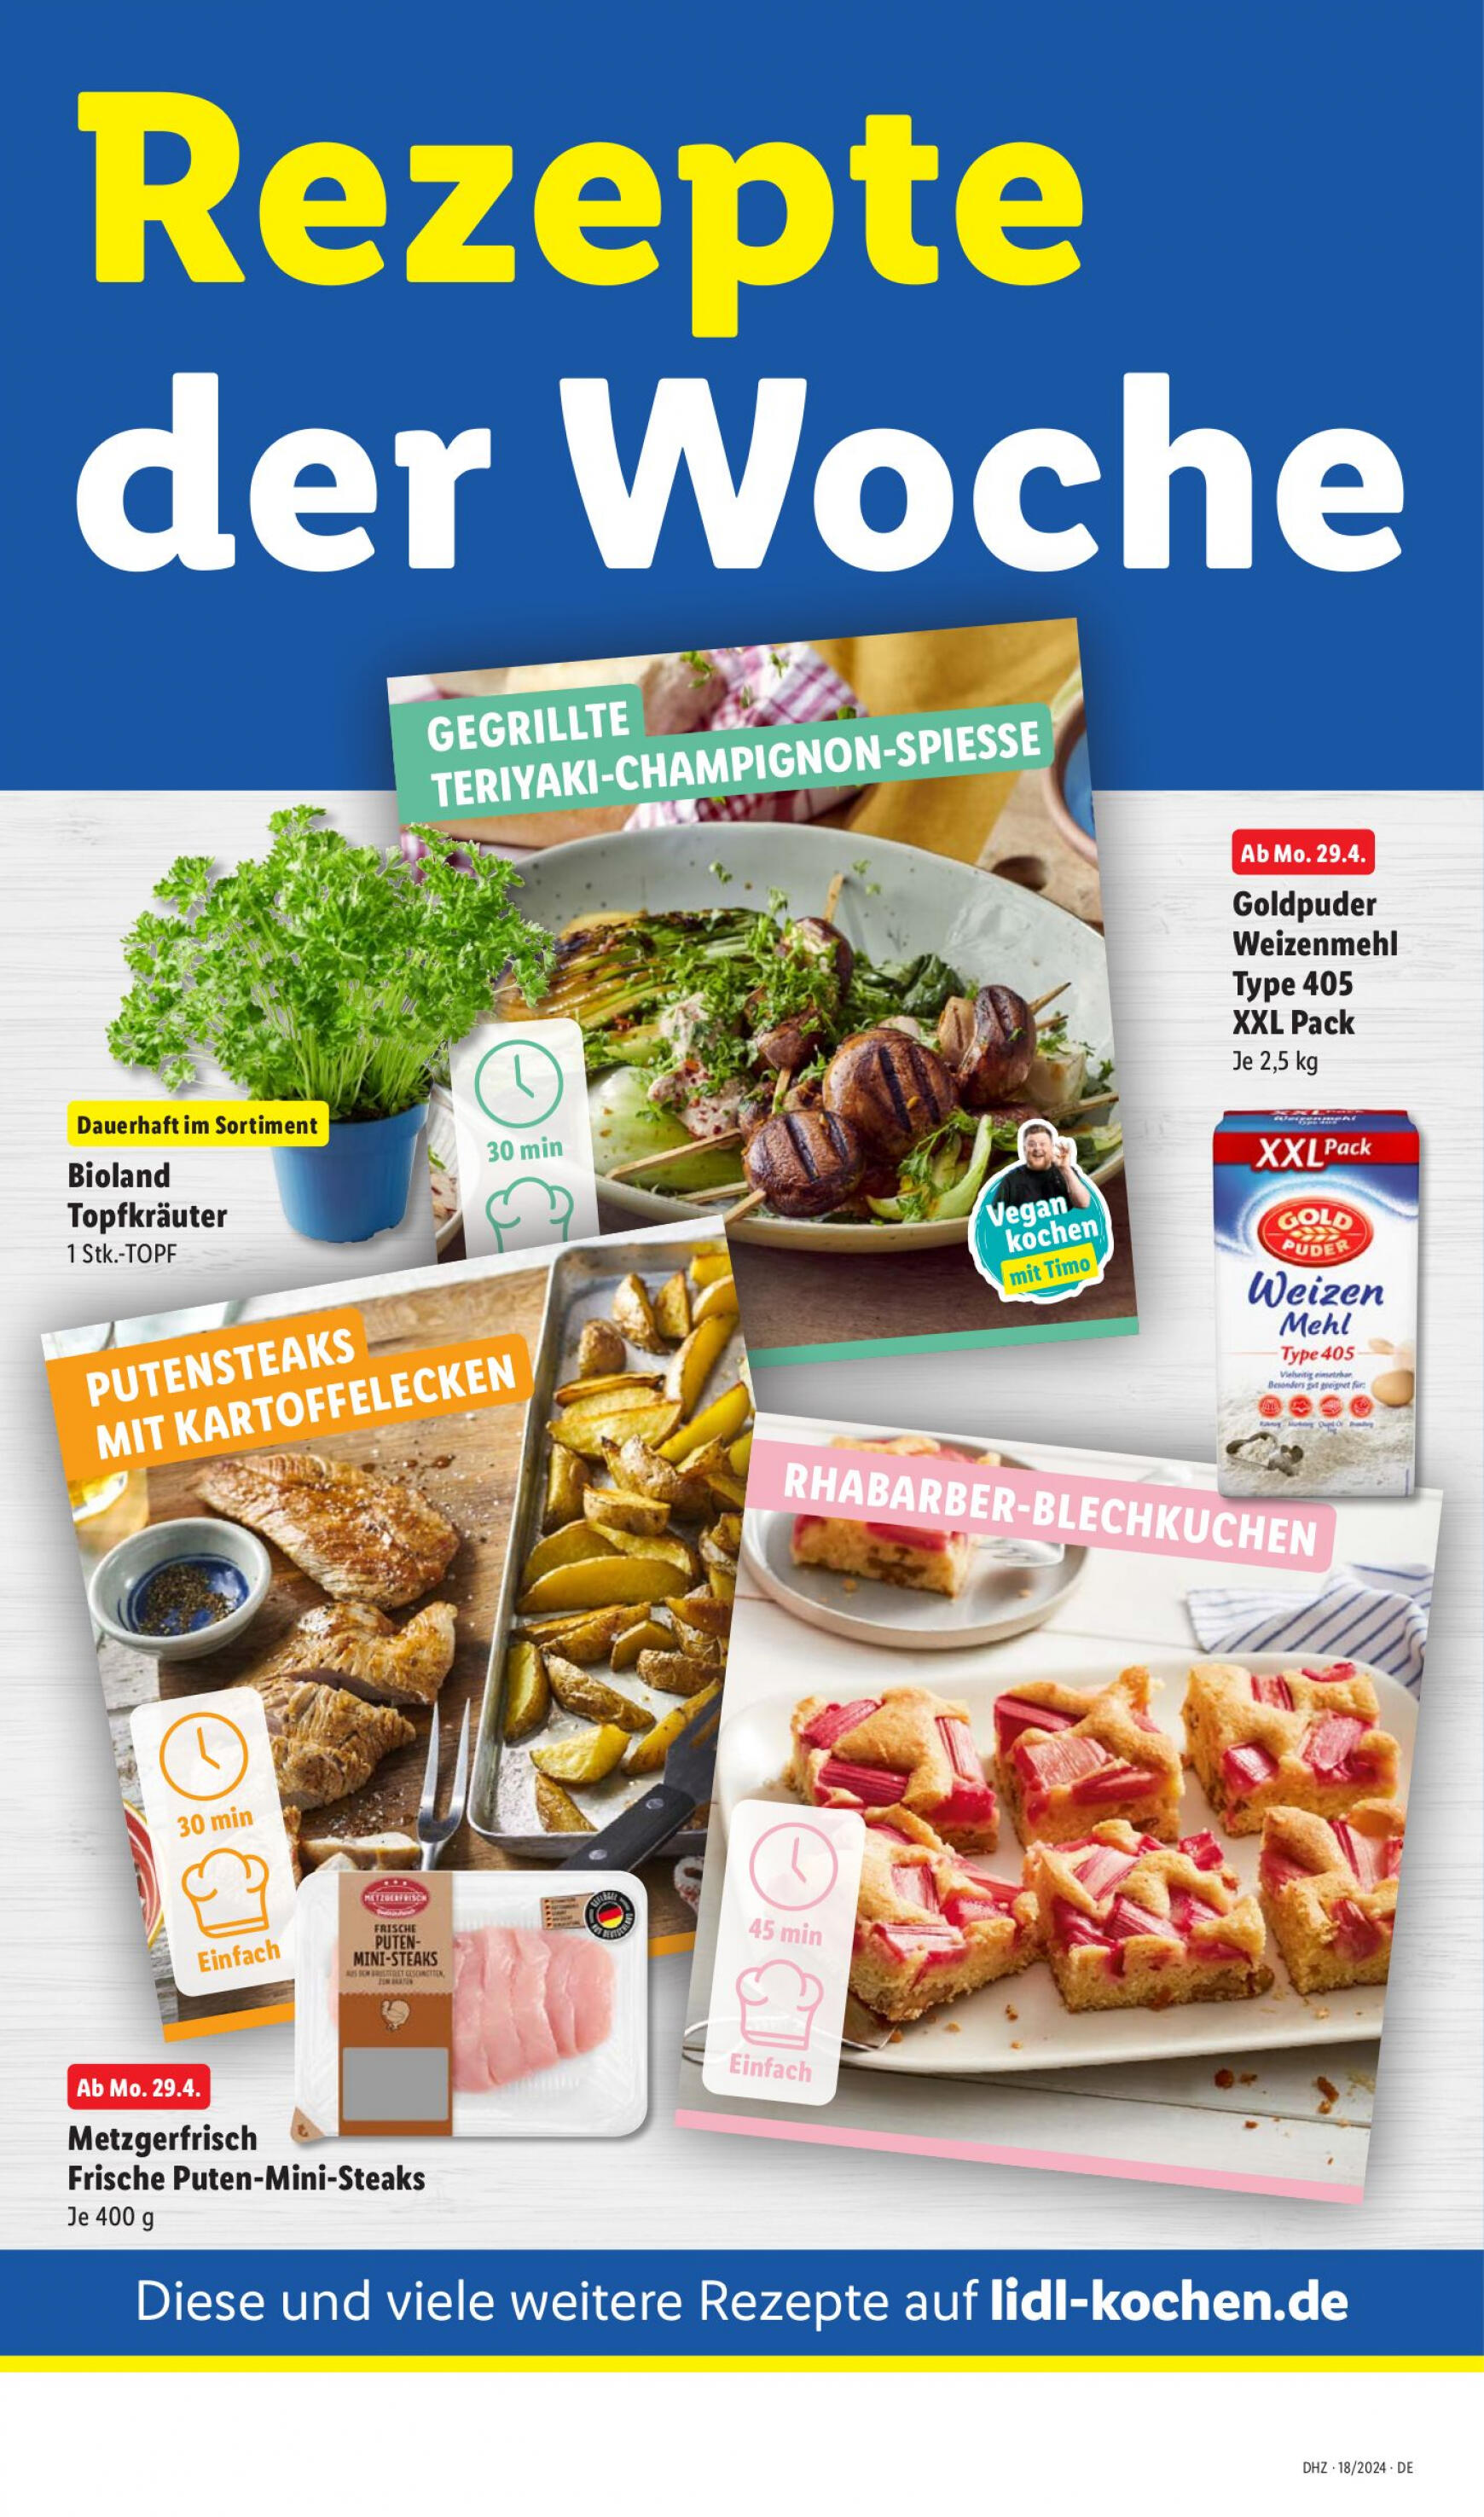 lidl - Flyer Lidl aktuell 29.04. - 04.05. - page: 58